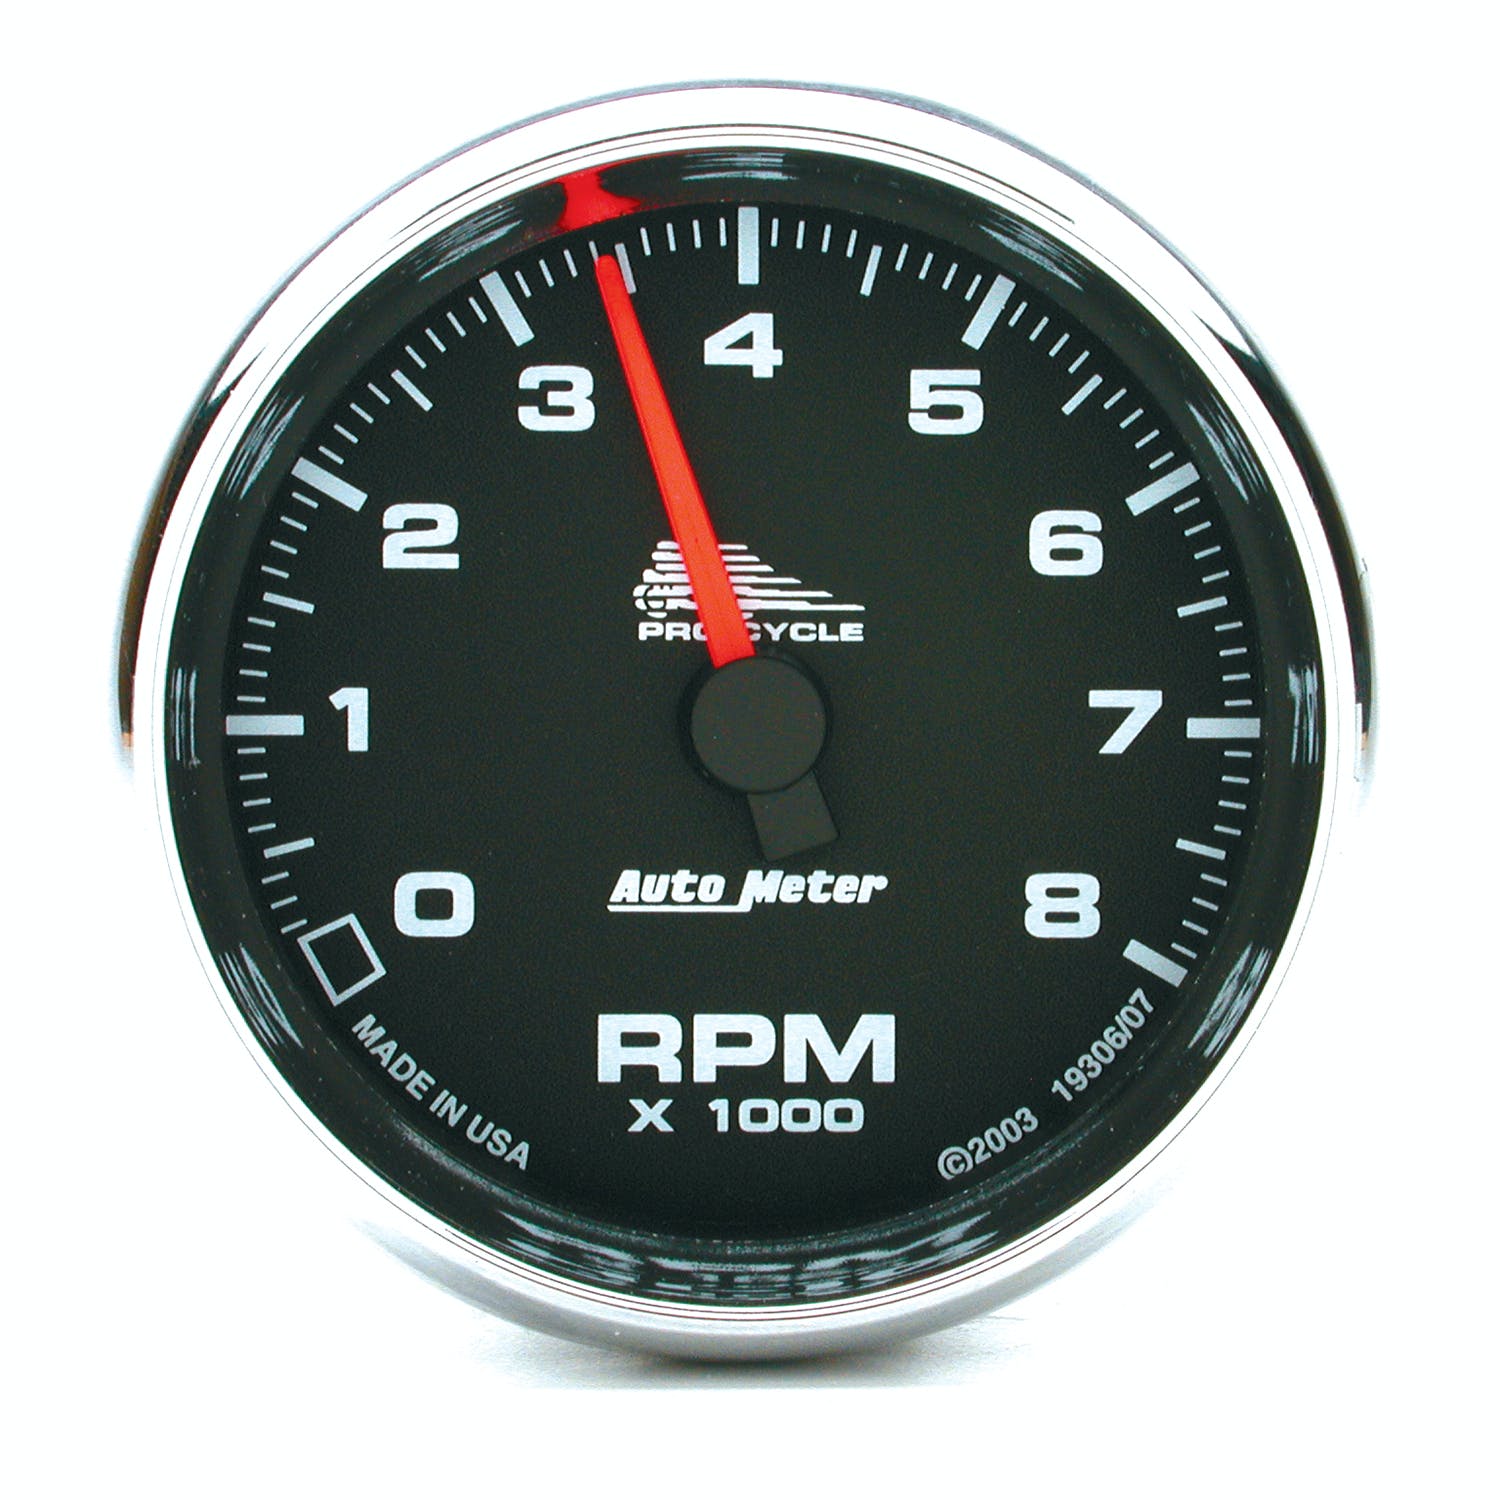 AutoMeter Products 19306 Tachometer Gauge, Black-Pro Cycle 2 5/8, 8000 RPM, 2and4 Cylinder